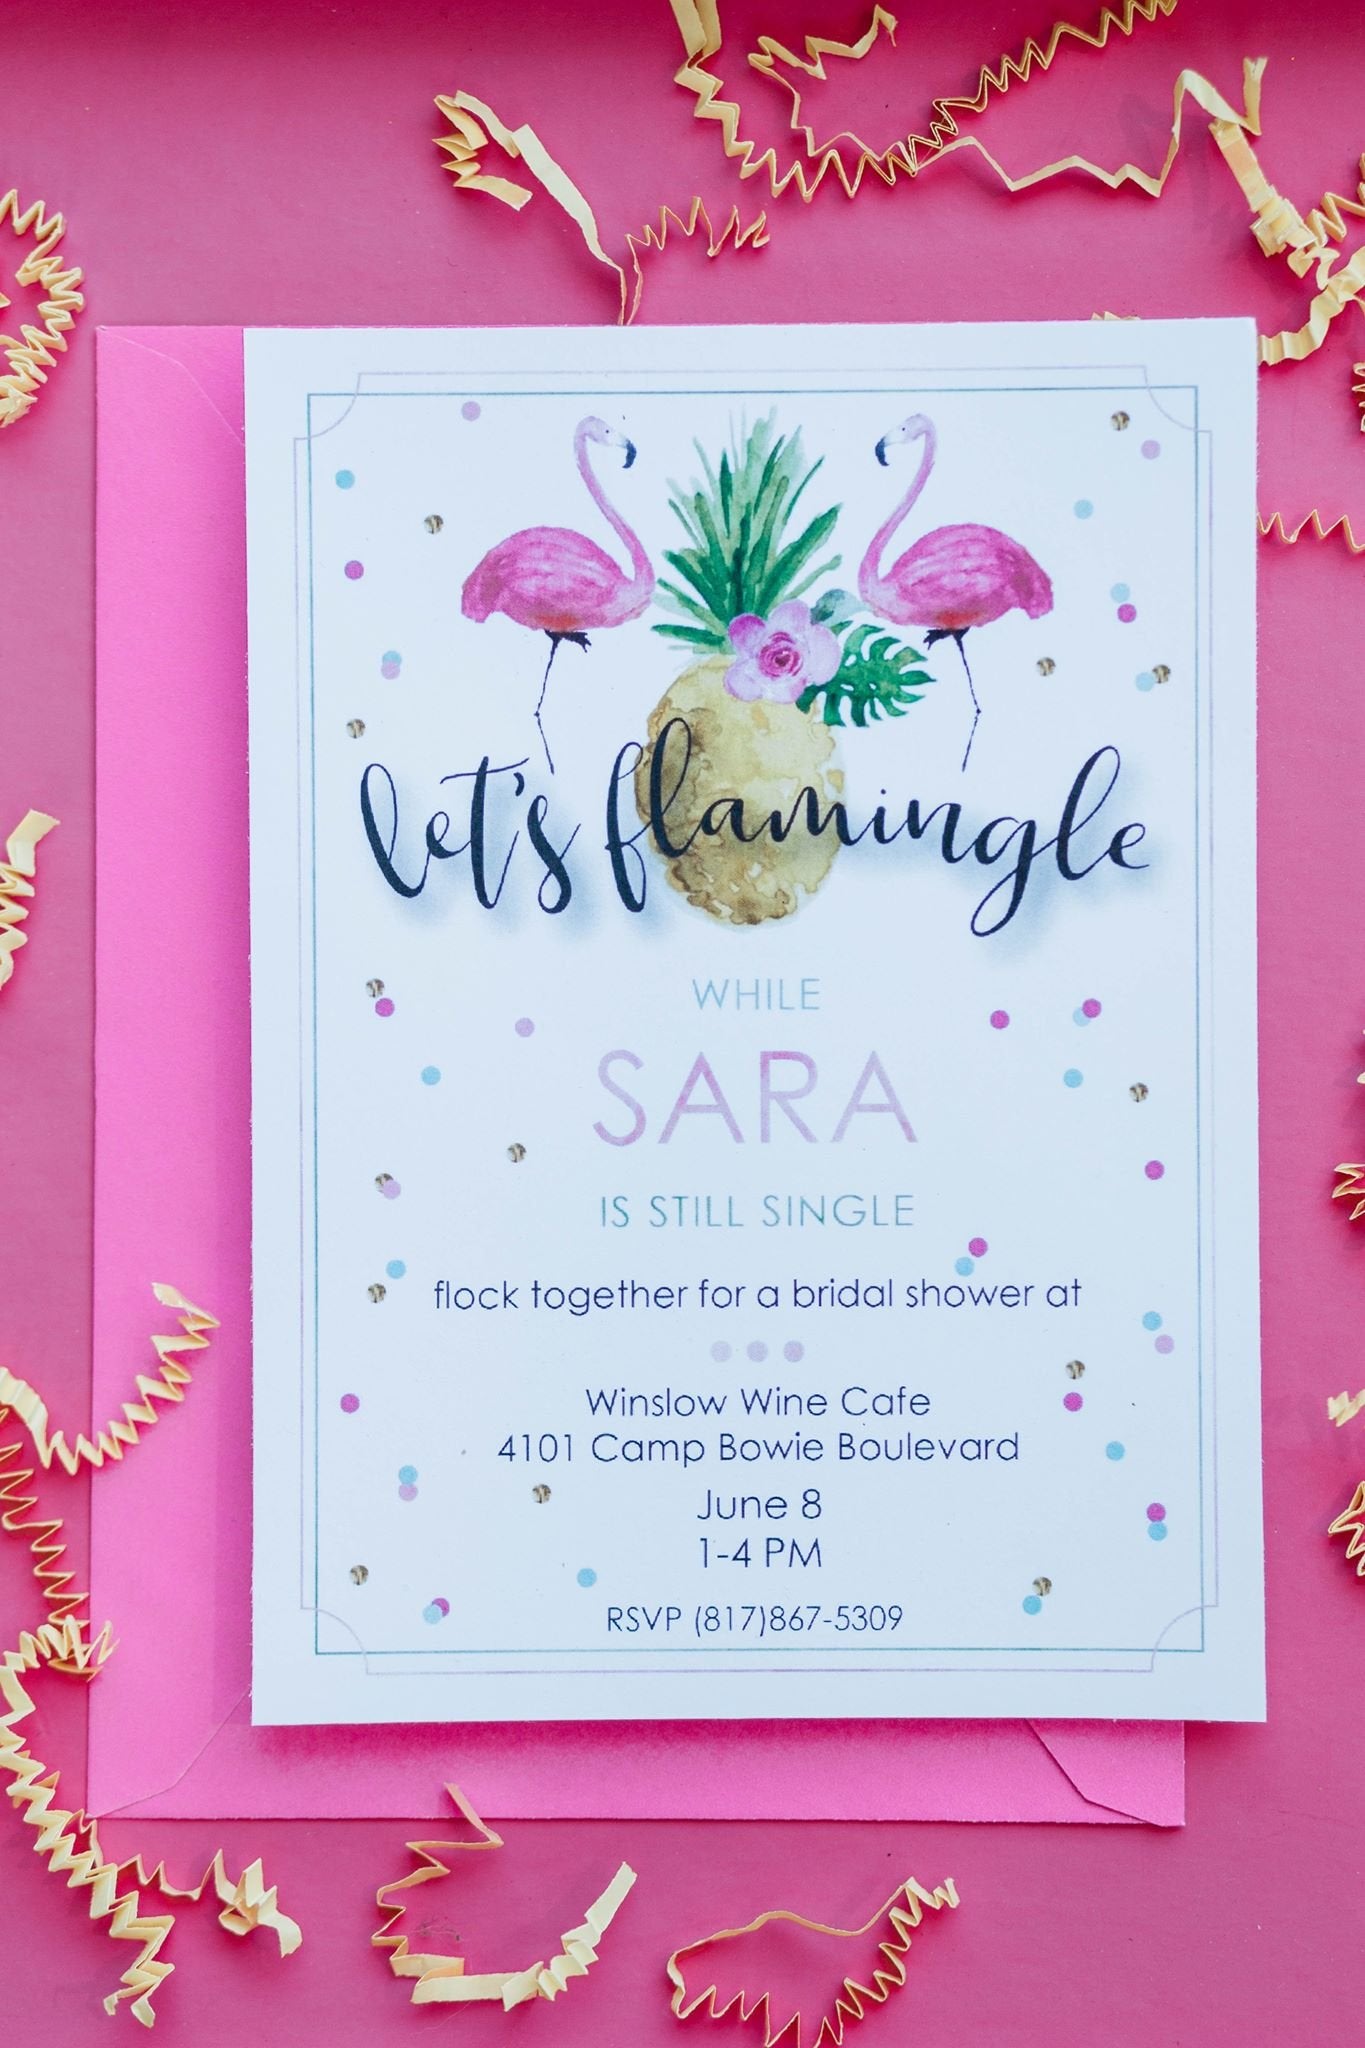 Let's Flamingle Tropical Pool Party Invitation